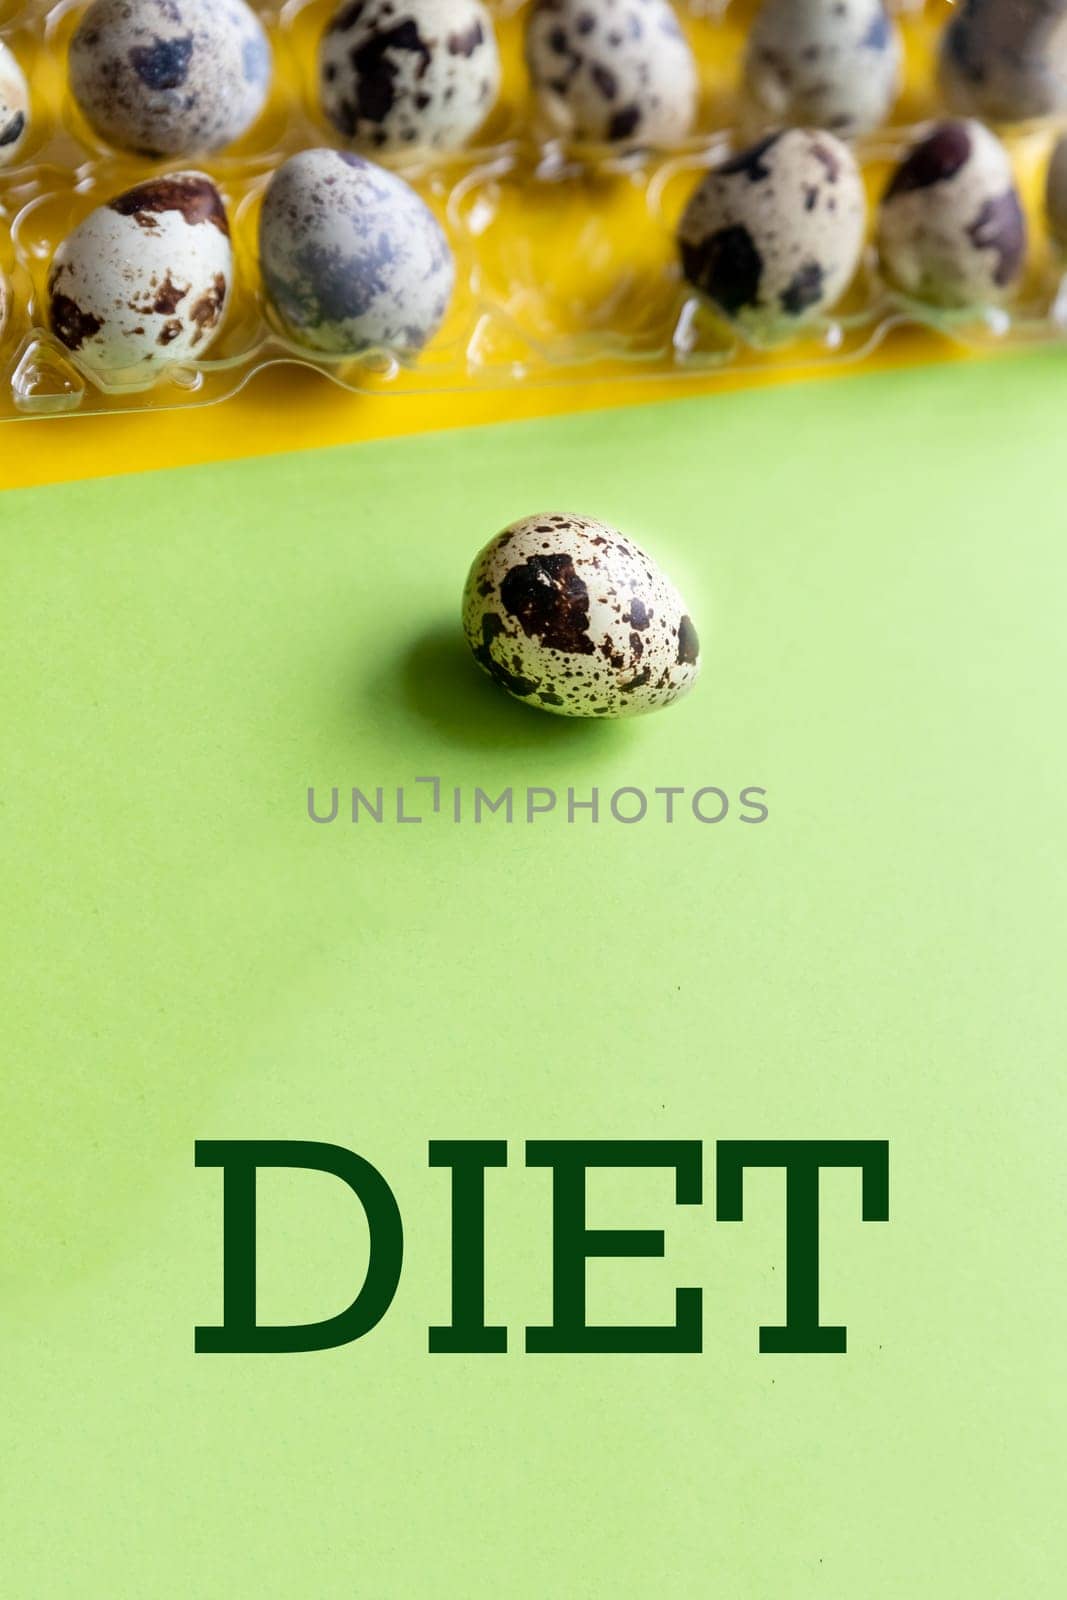 Creative quail egg layout on colorful background. Quail eggs pattern. Happy easter concept. Minimal design. flat lay, eggs pattern. Springtime Banner with text diet by YuliaYaspe1979